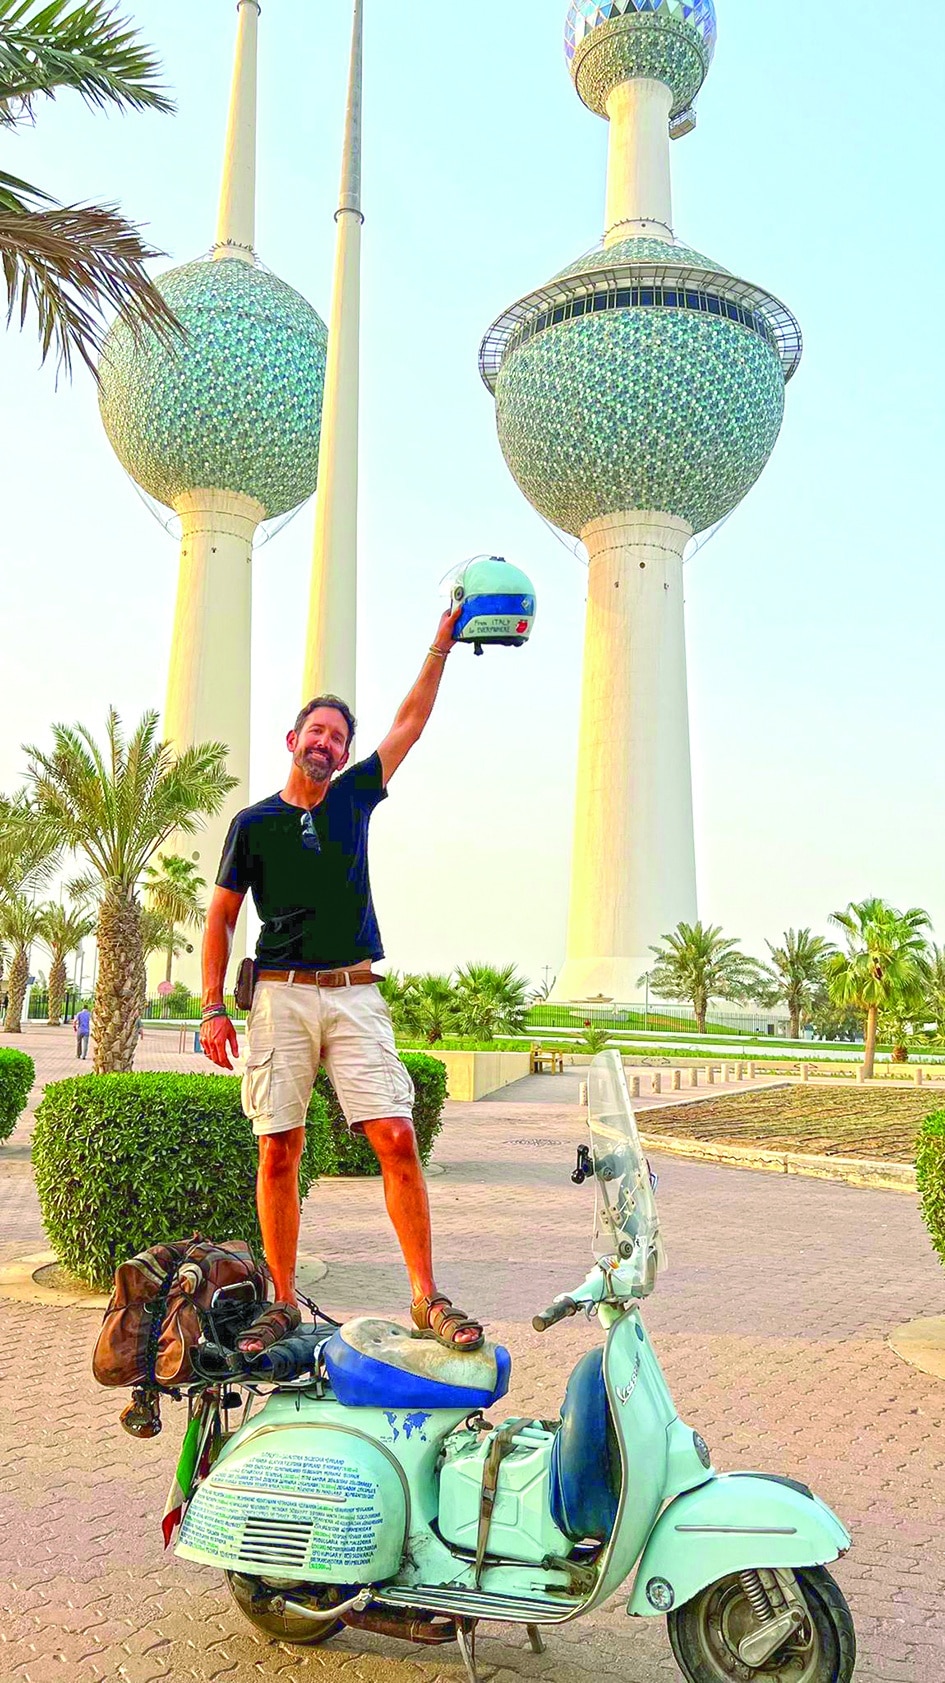 Ilario Lavarra poses in front of Kuwait Towers.